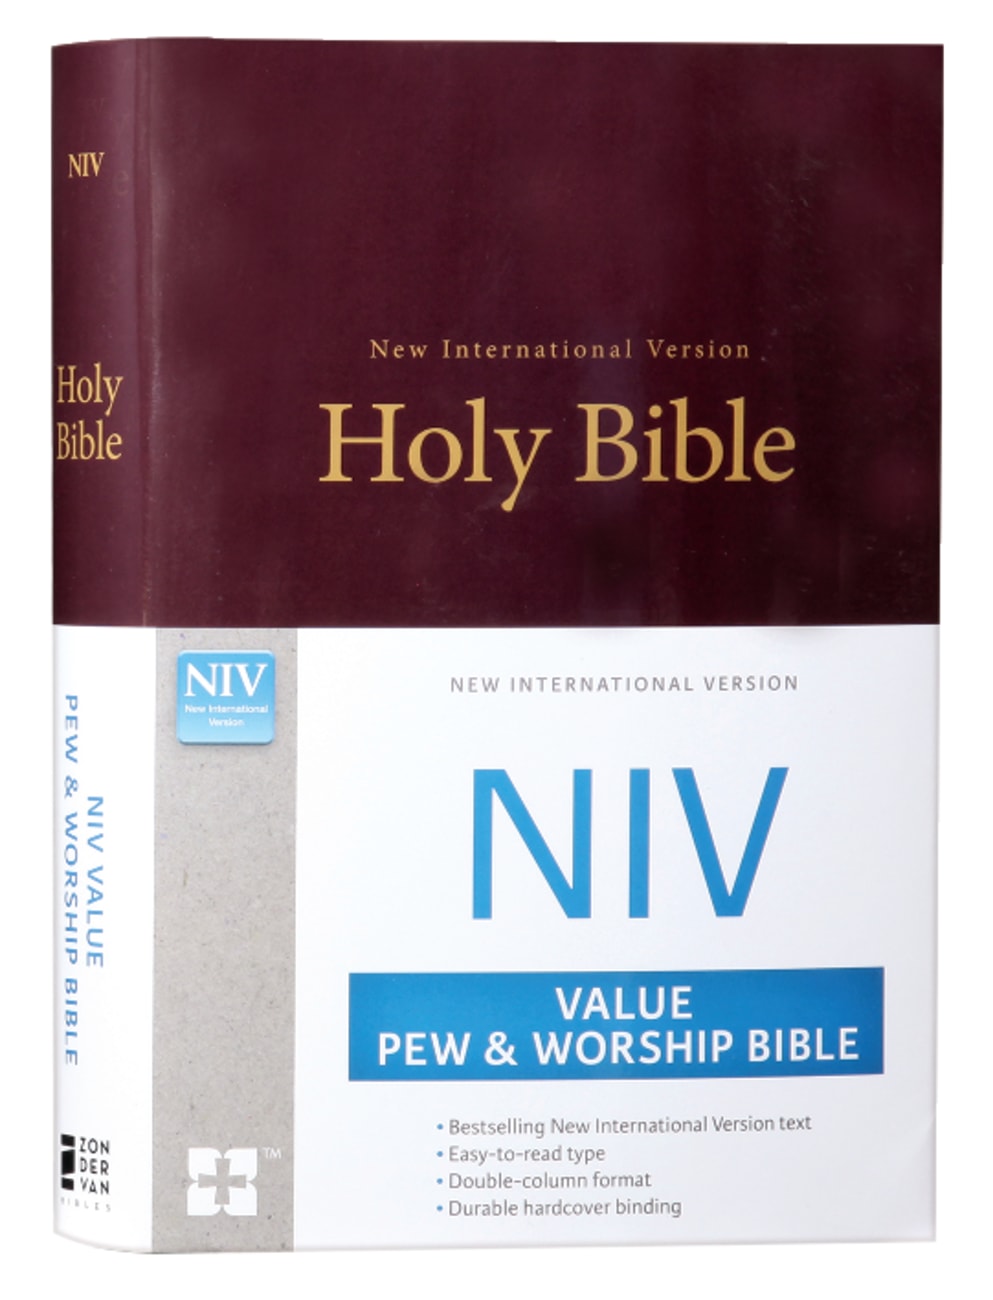 B NIV VALUE PEW AND WORSHIP BIBLE BURGUNDY (BLACK LETTER EDITION)